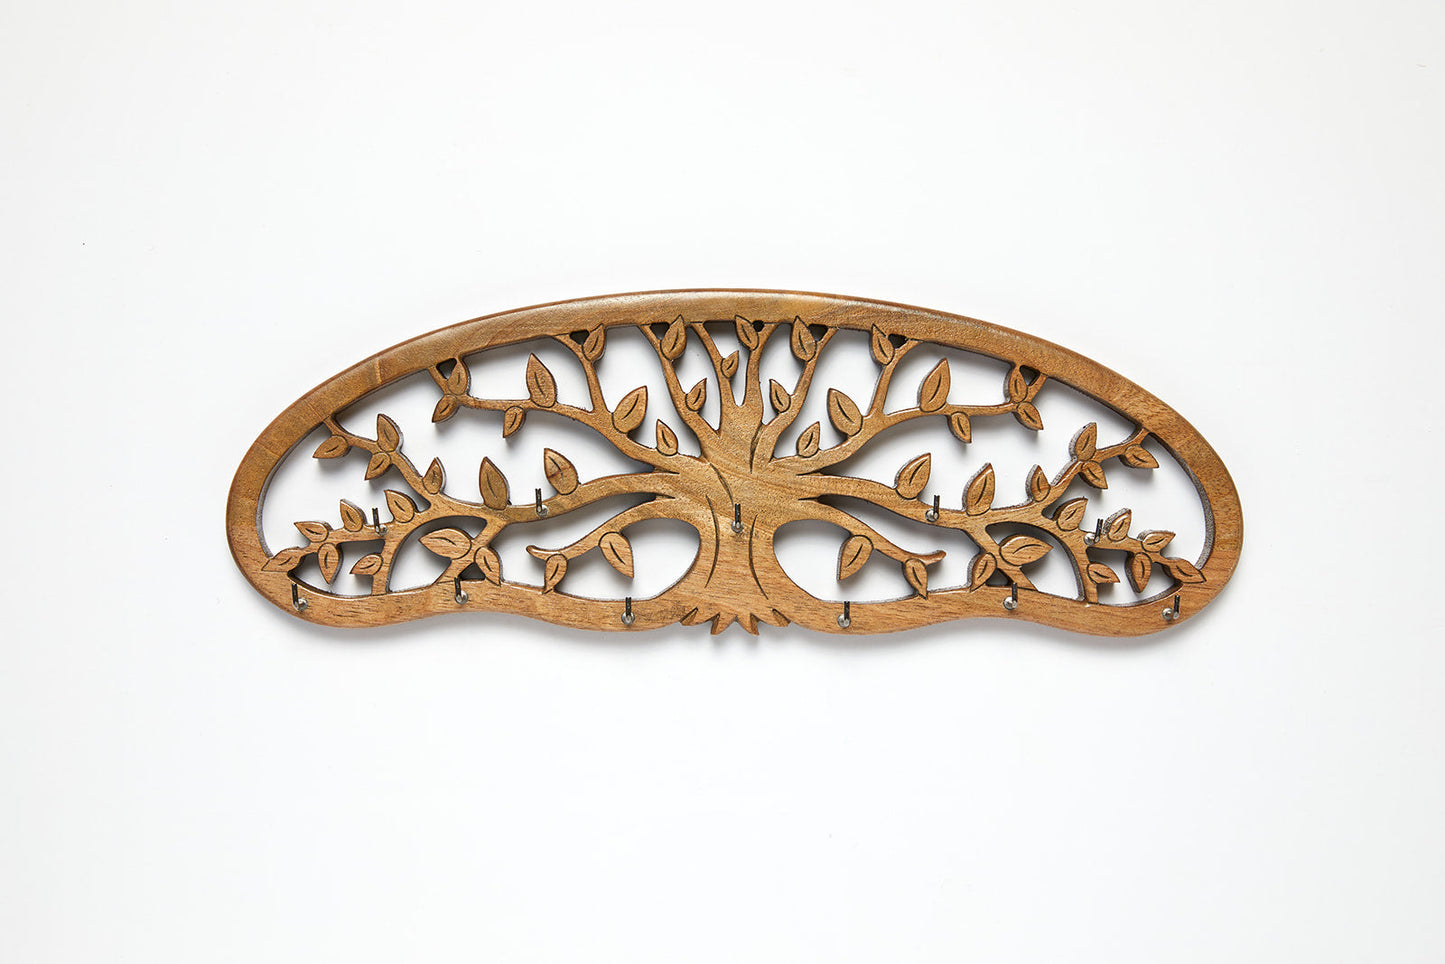 TREE OF LIFE HERB AND FLOWER DRYING RACK